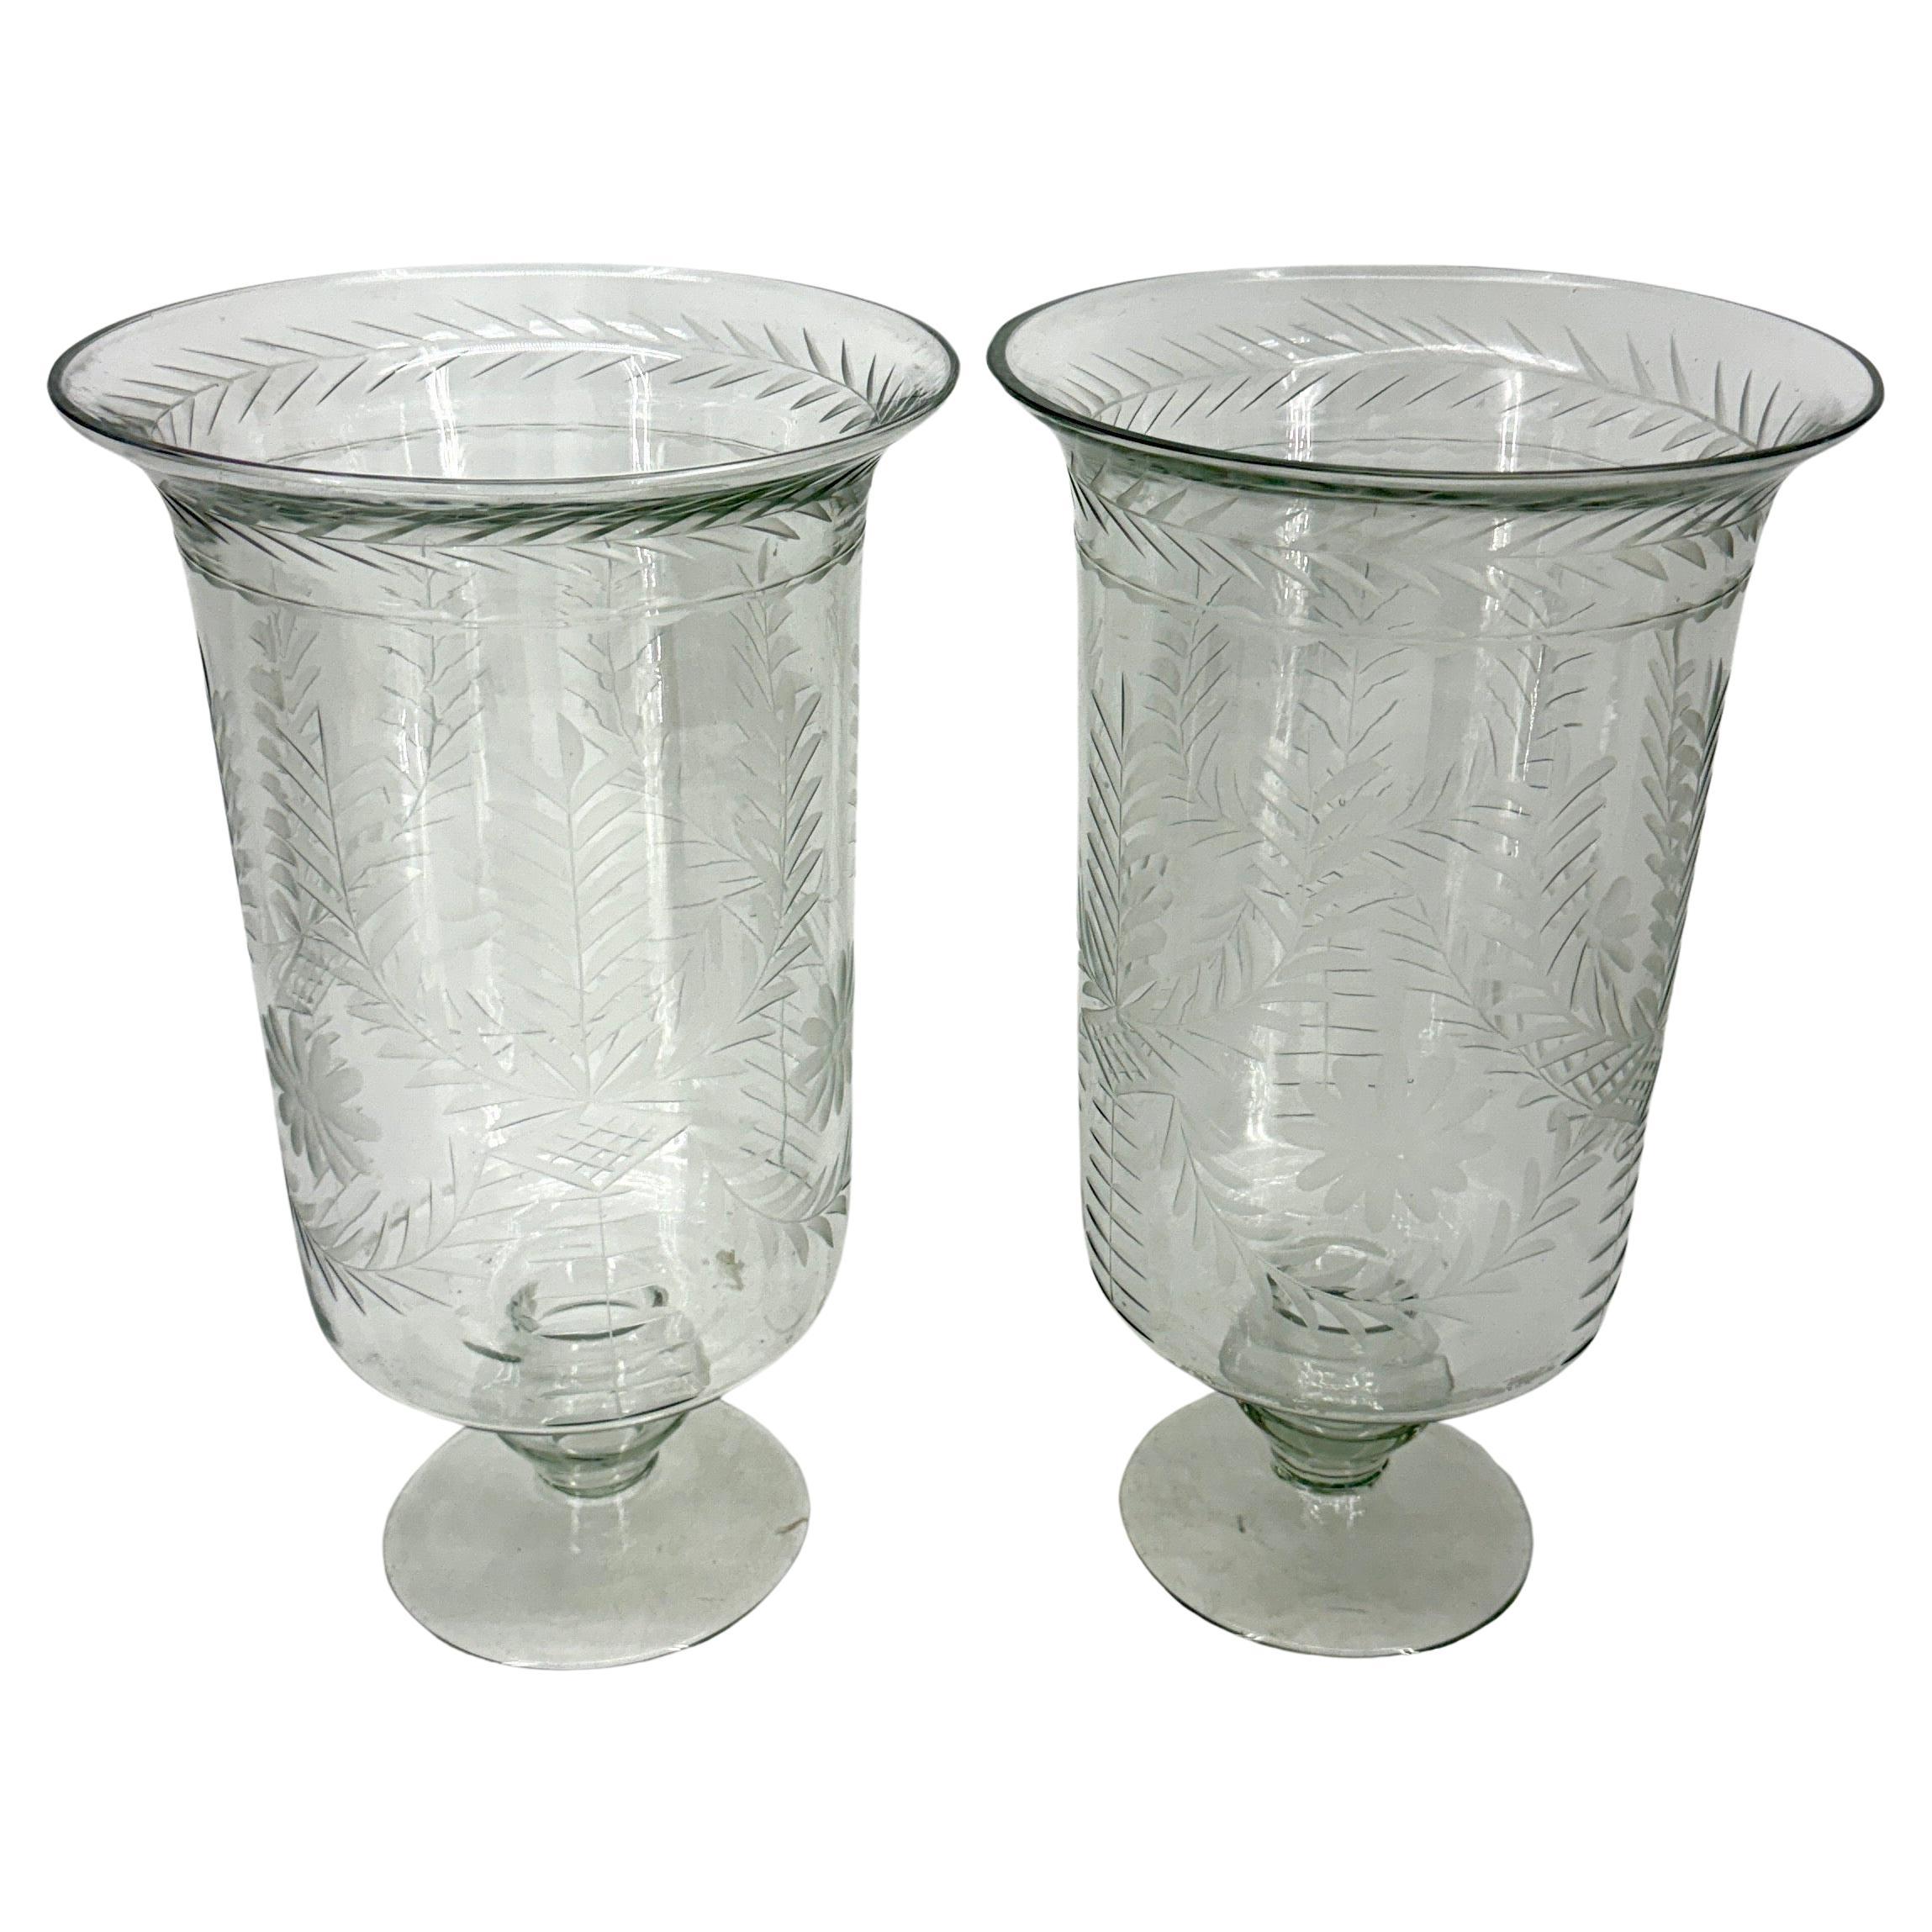 Pair of Tall Etched Glass Hurricanes or Candleholders